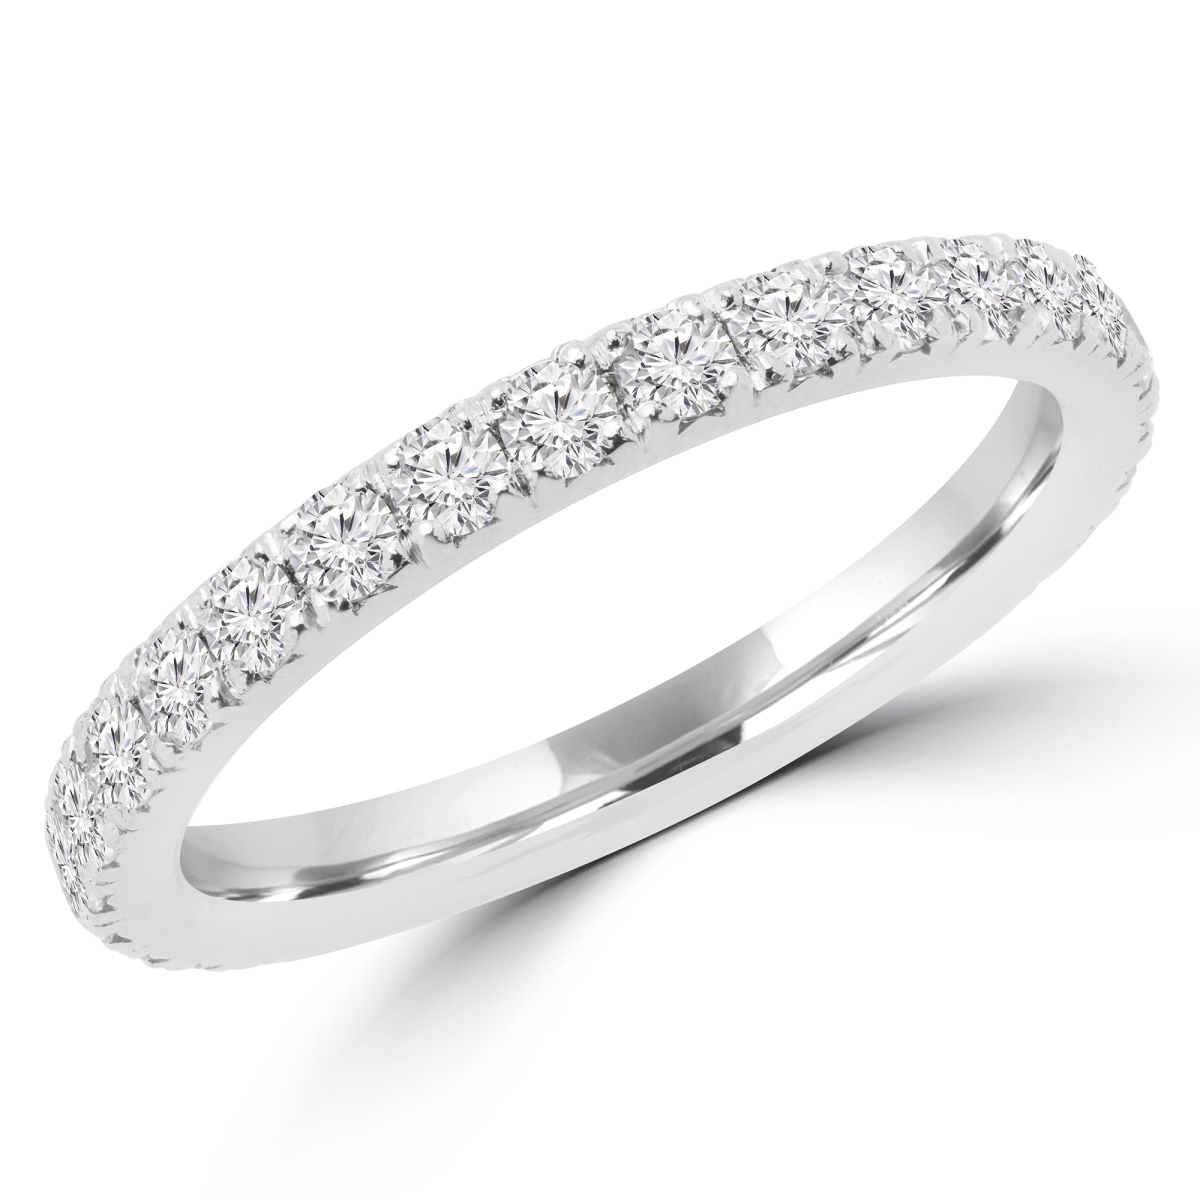 Picture of Majesty Diamonds MD170308-7.75 0.66 CTW Round Diamond Semi-Eternity Wedding Band Ring in 14K White Gold - Size 7.75